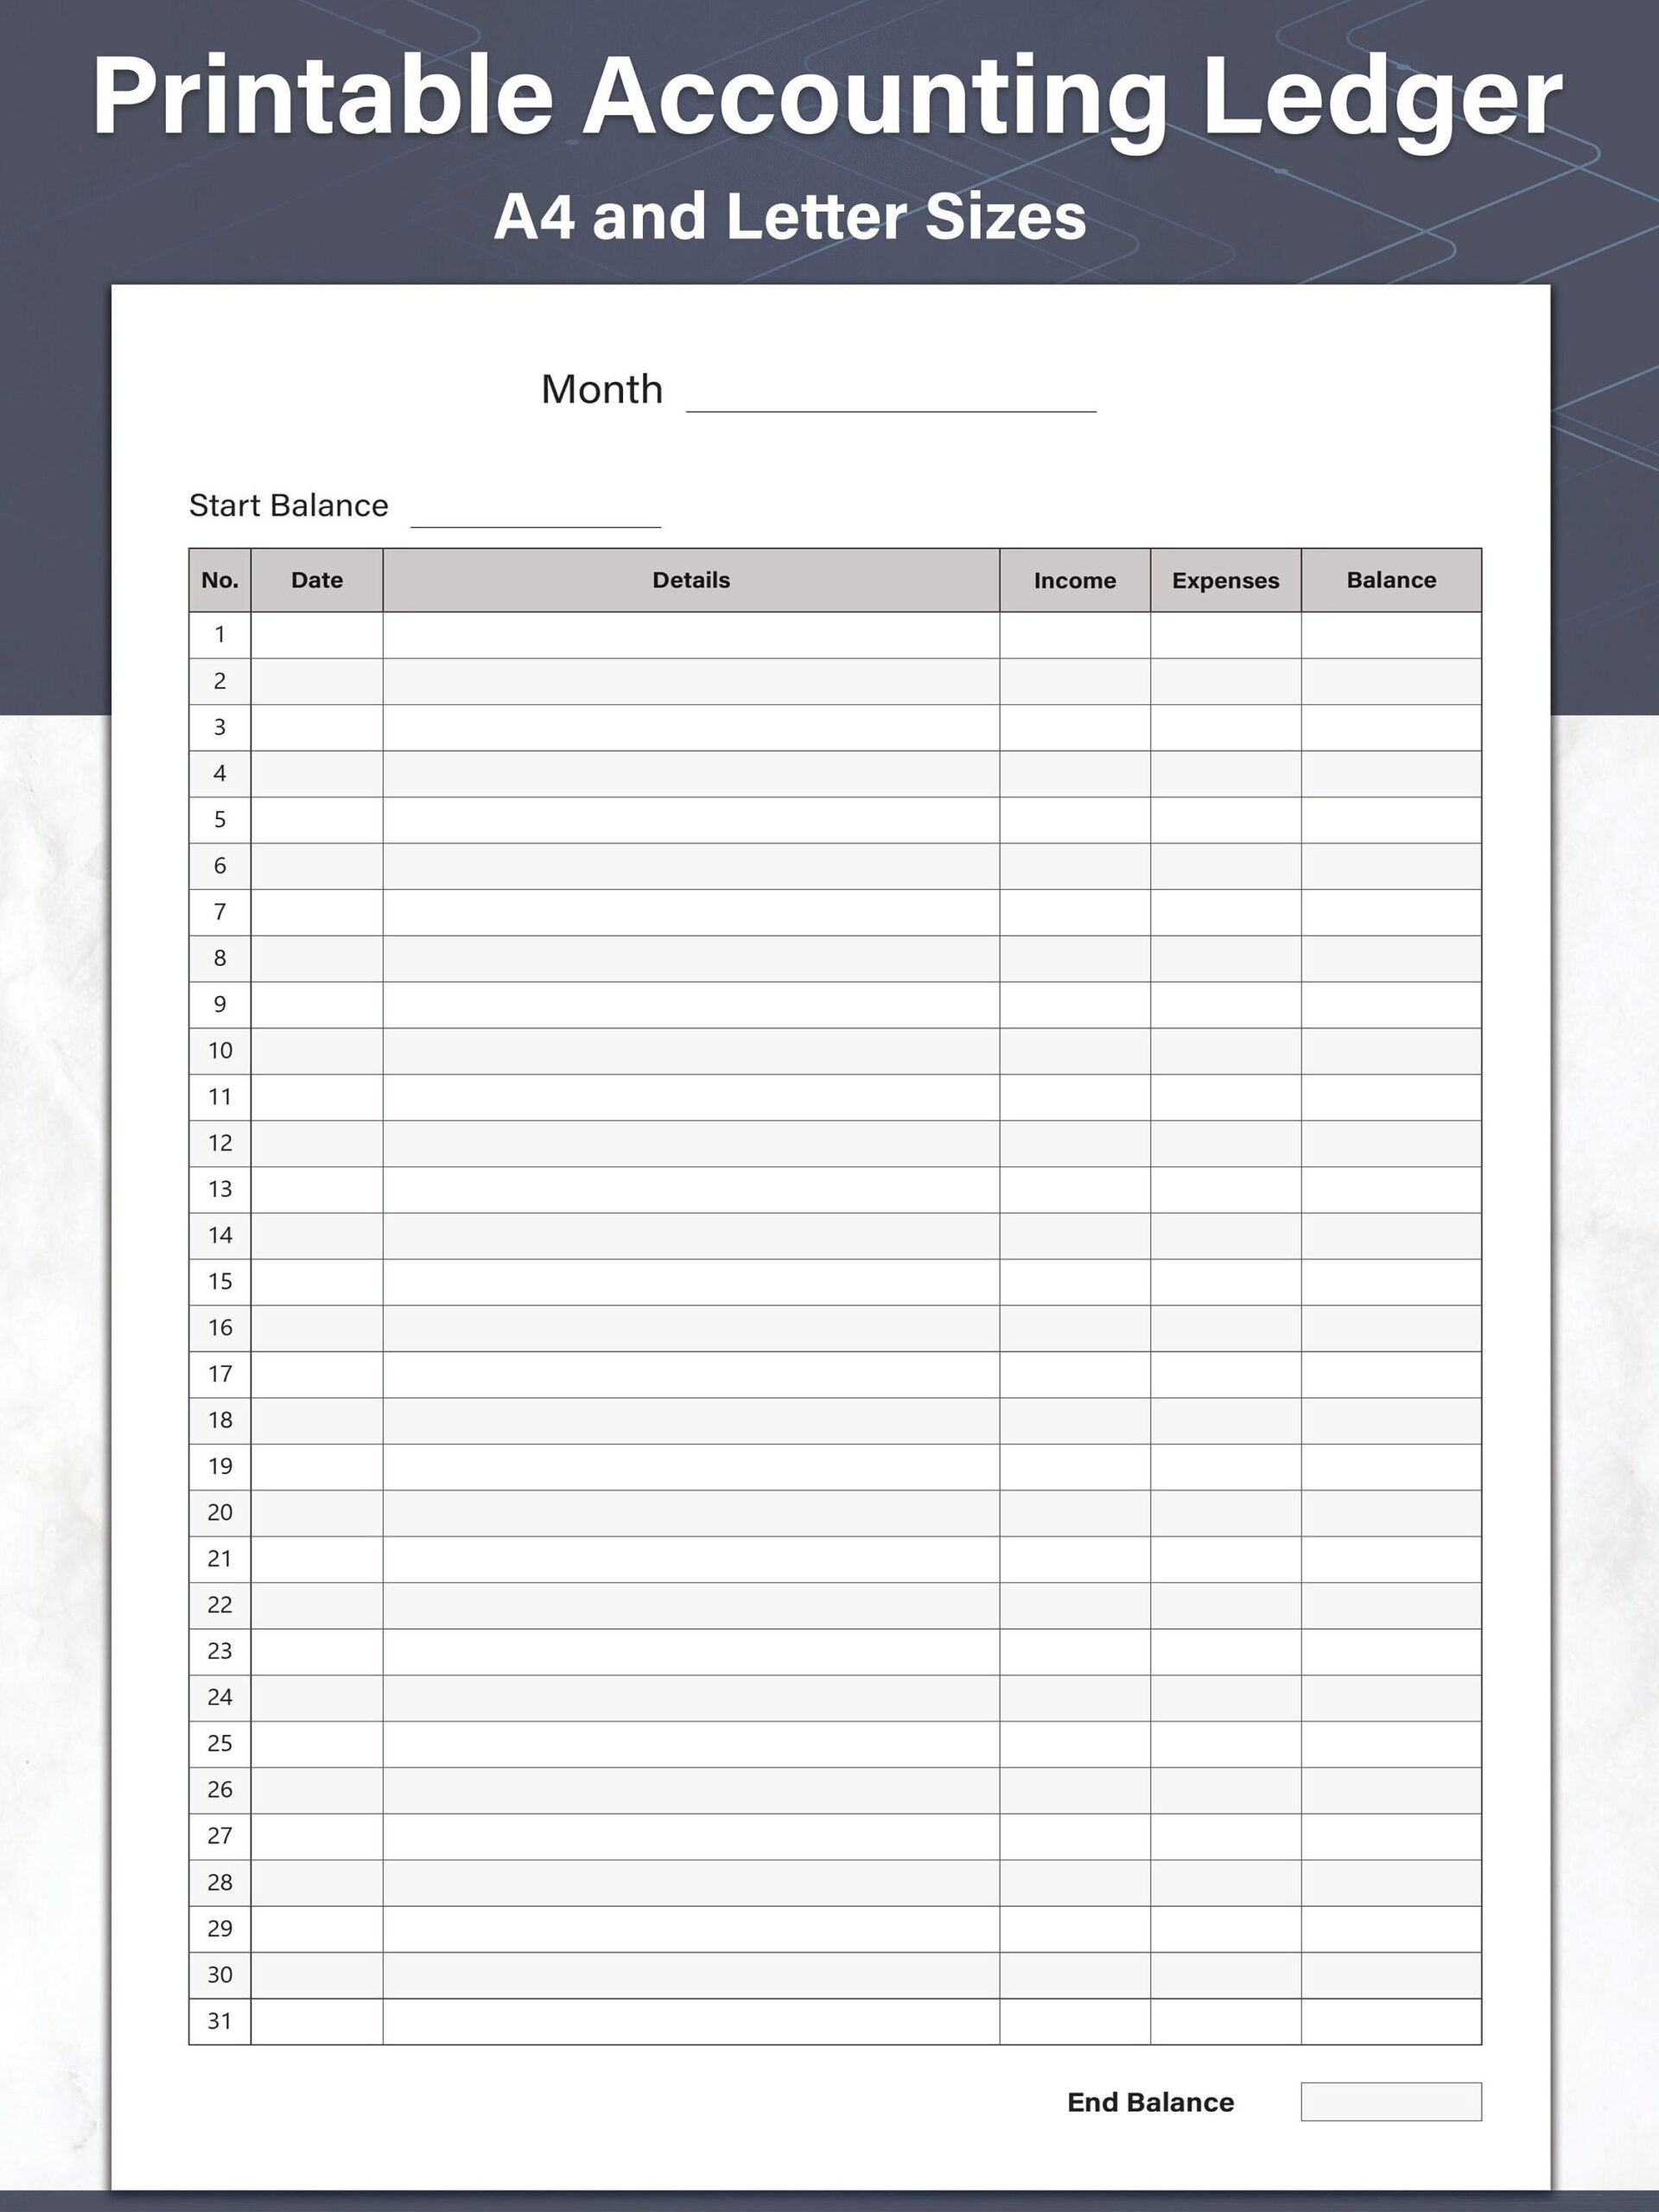 Printable Accounting Ledger Money Tracker And General Ledger - Free Printable Accounting Paper